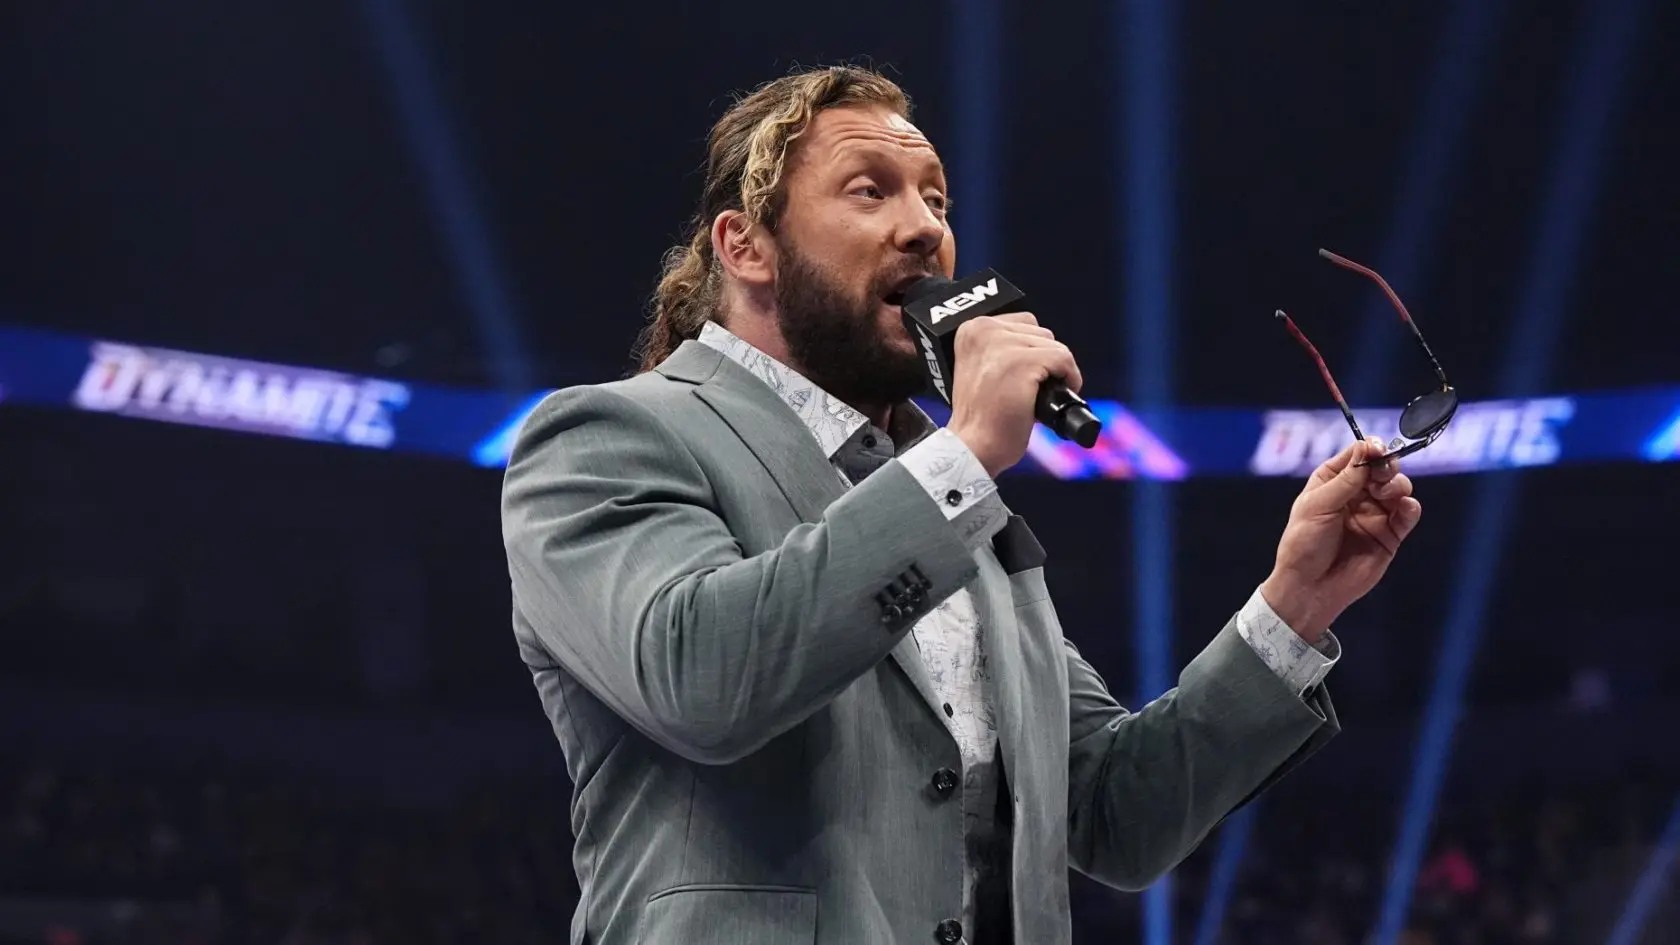 Kenny Omega On Roman Reigns: He Is Presented In The Same Way I Would Love To Be Presented